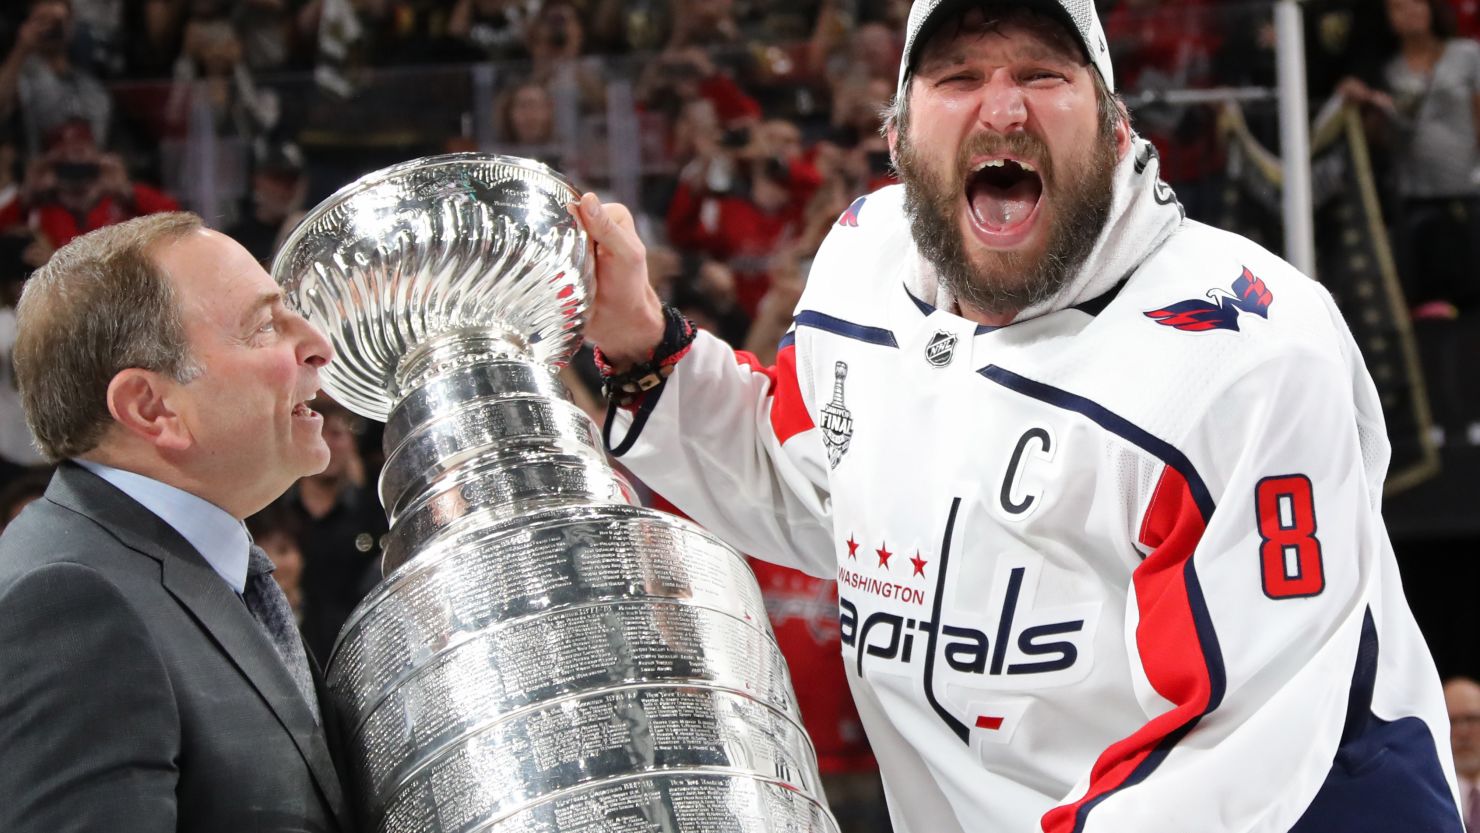 Alex Ovechkin is presented the Stanley Cup by NHL Commissioner Gary Bettman after his team defeated the Vegas Golden Knights 4-3 in Game 5.